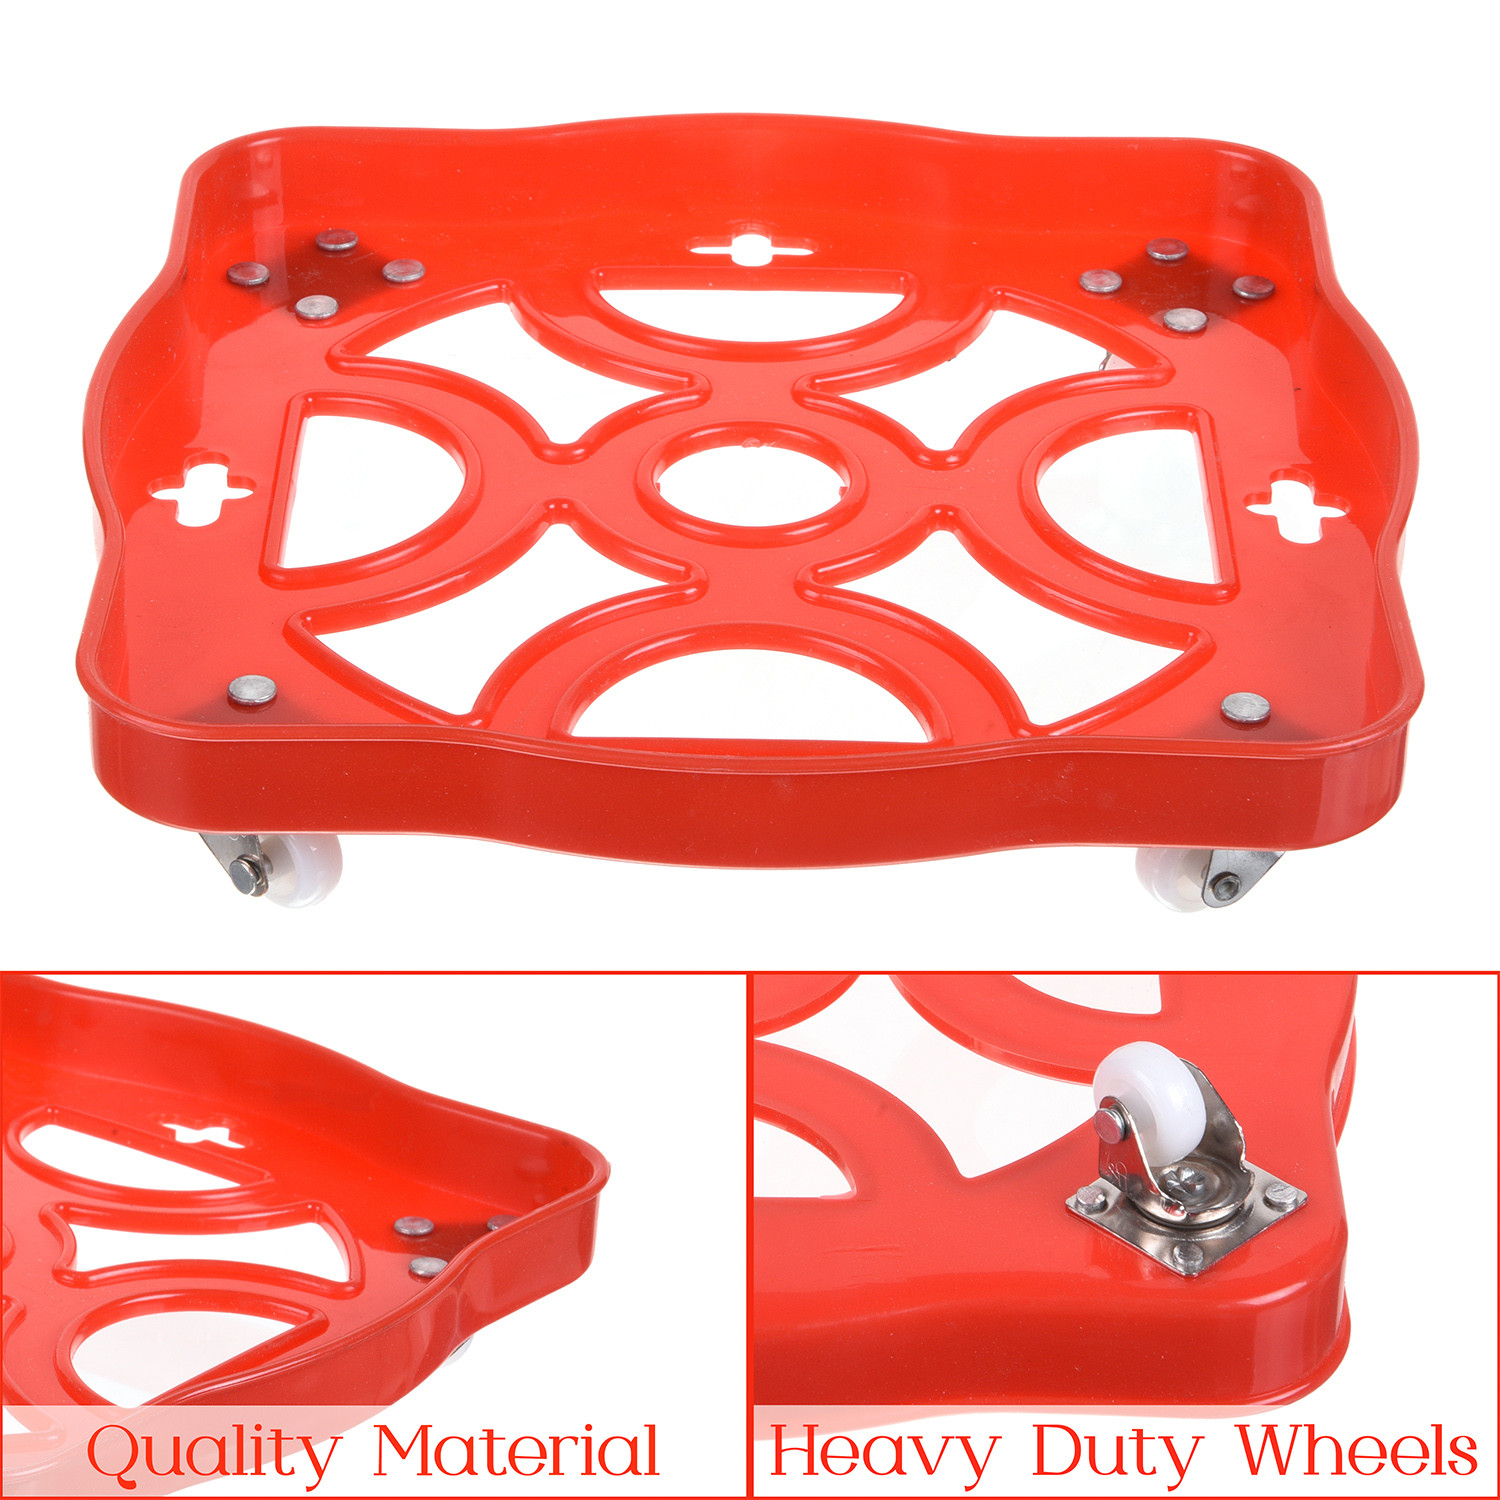 Kuber Industries Cylinder Stand|Unbreakable Plastic Gas Cylinder Stand|LPG Cylinder Stand|Gas Trolly|Square Shape Cylinder Trolley With Wheels (Red)